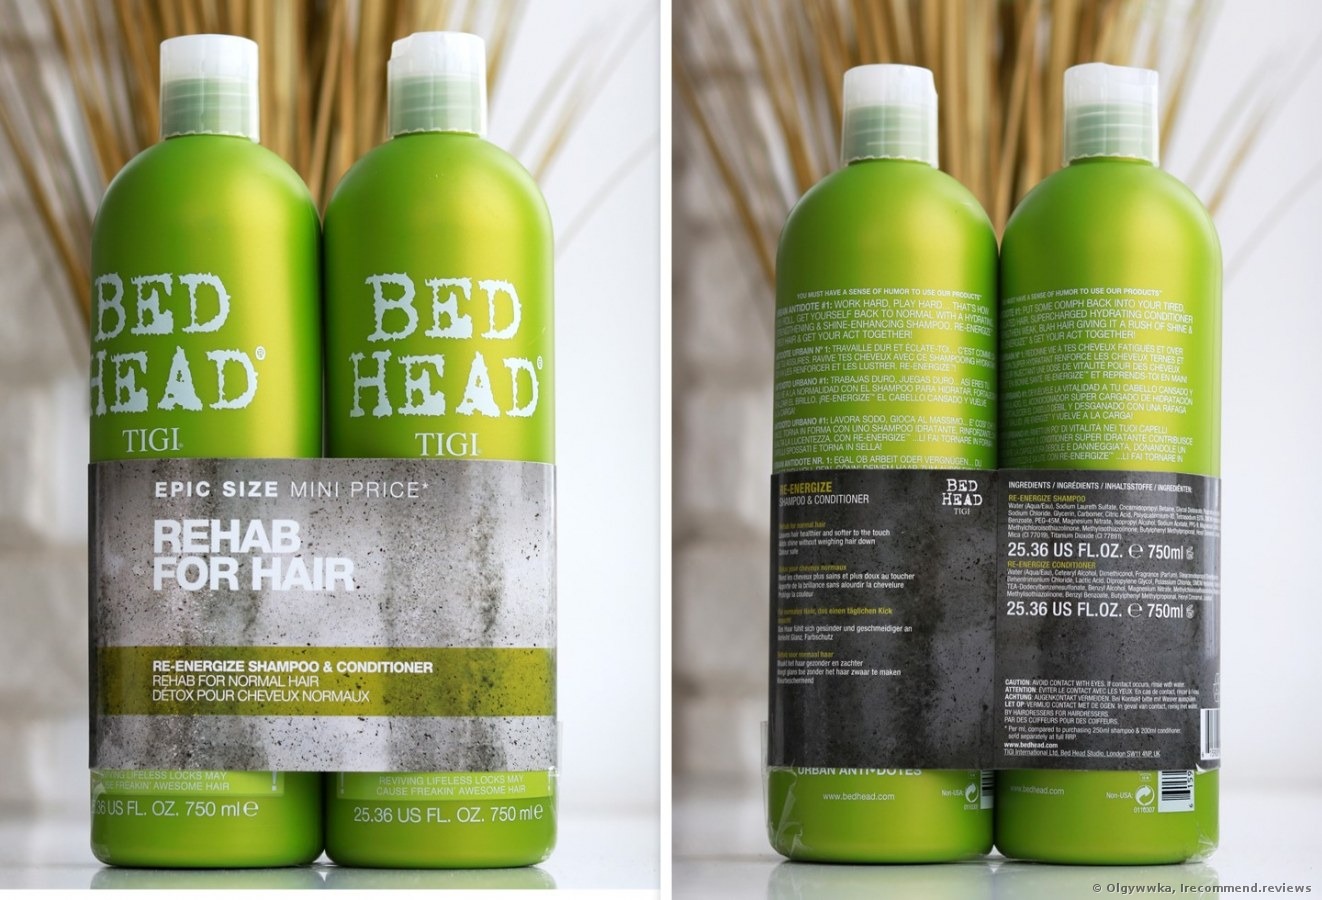 TIGI Bed Head Urban Antidotes Re-Energize Shampoo - « Urban Antidotes Shampoo has changed my bleached hair the better, but what can this level three hydrating shampoo do for damaged hair?